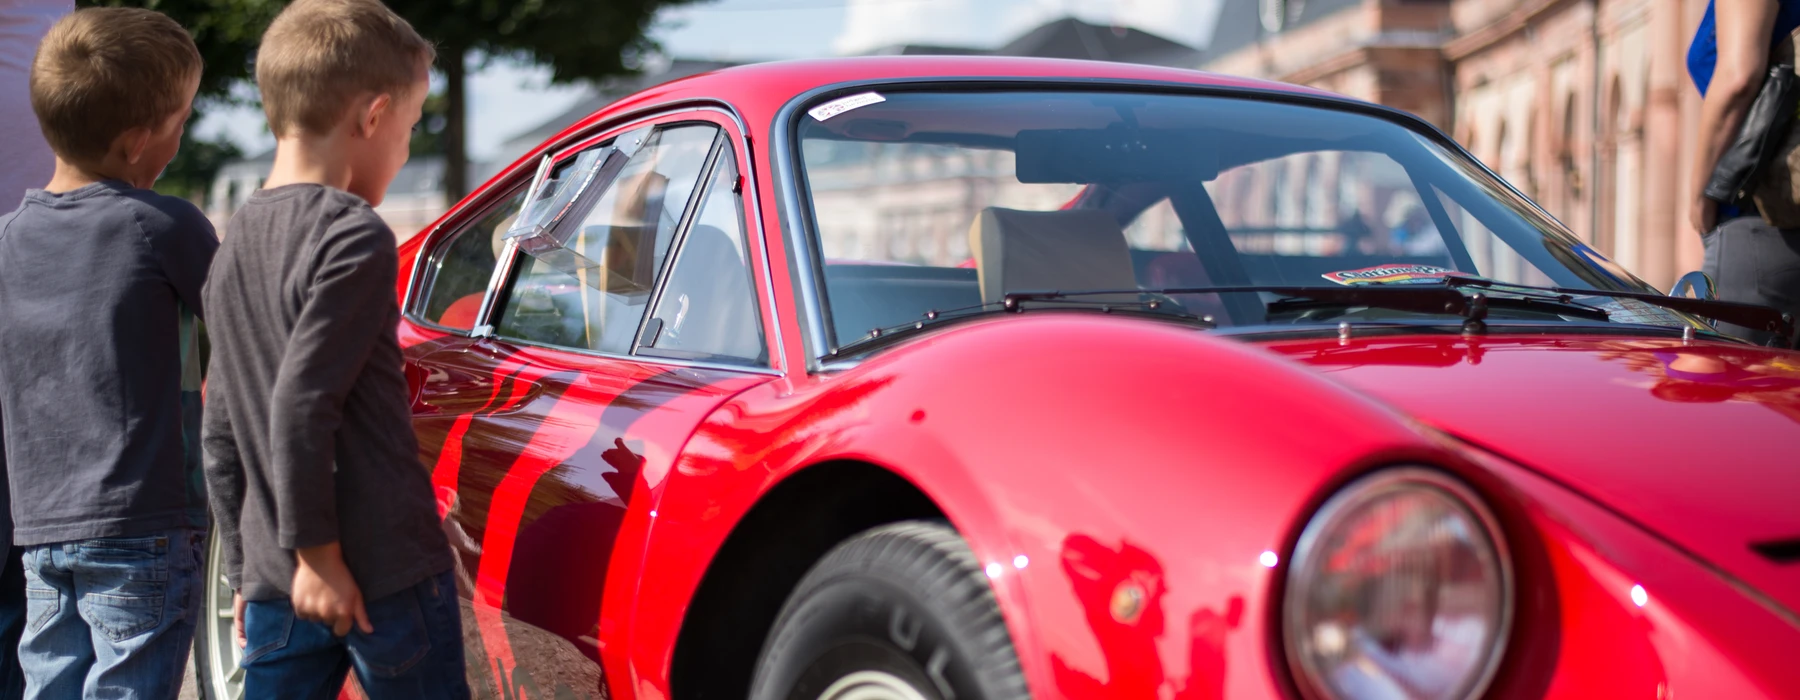 Fashion and Fast Cars – Gstaad Concours d'Elegance